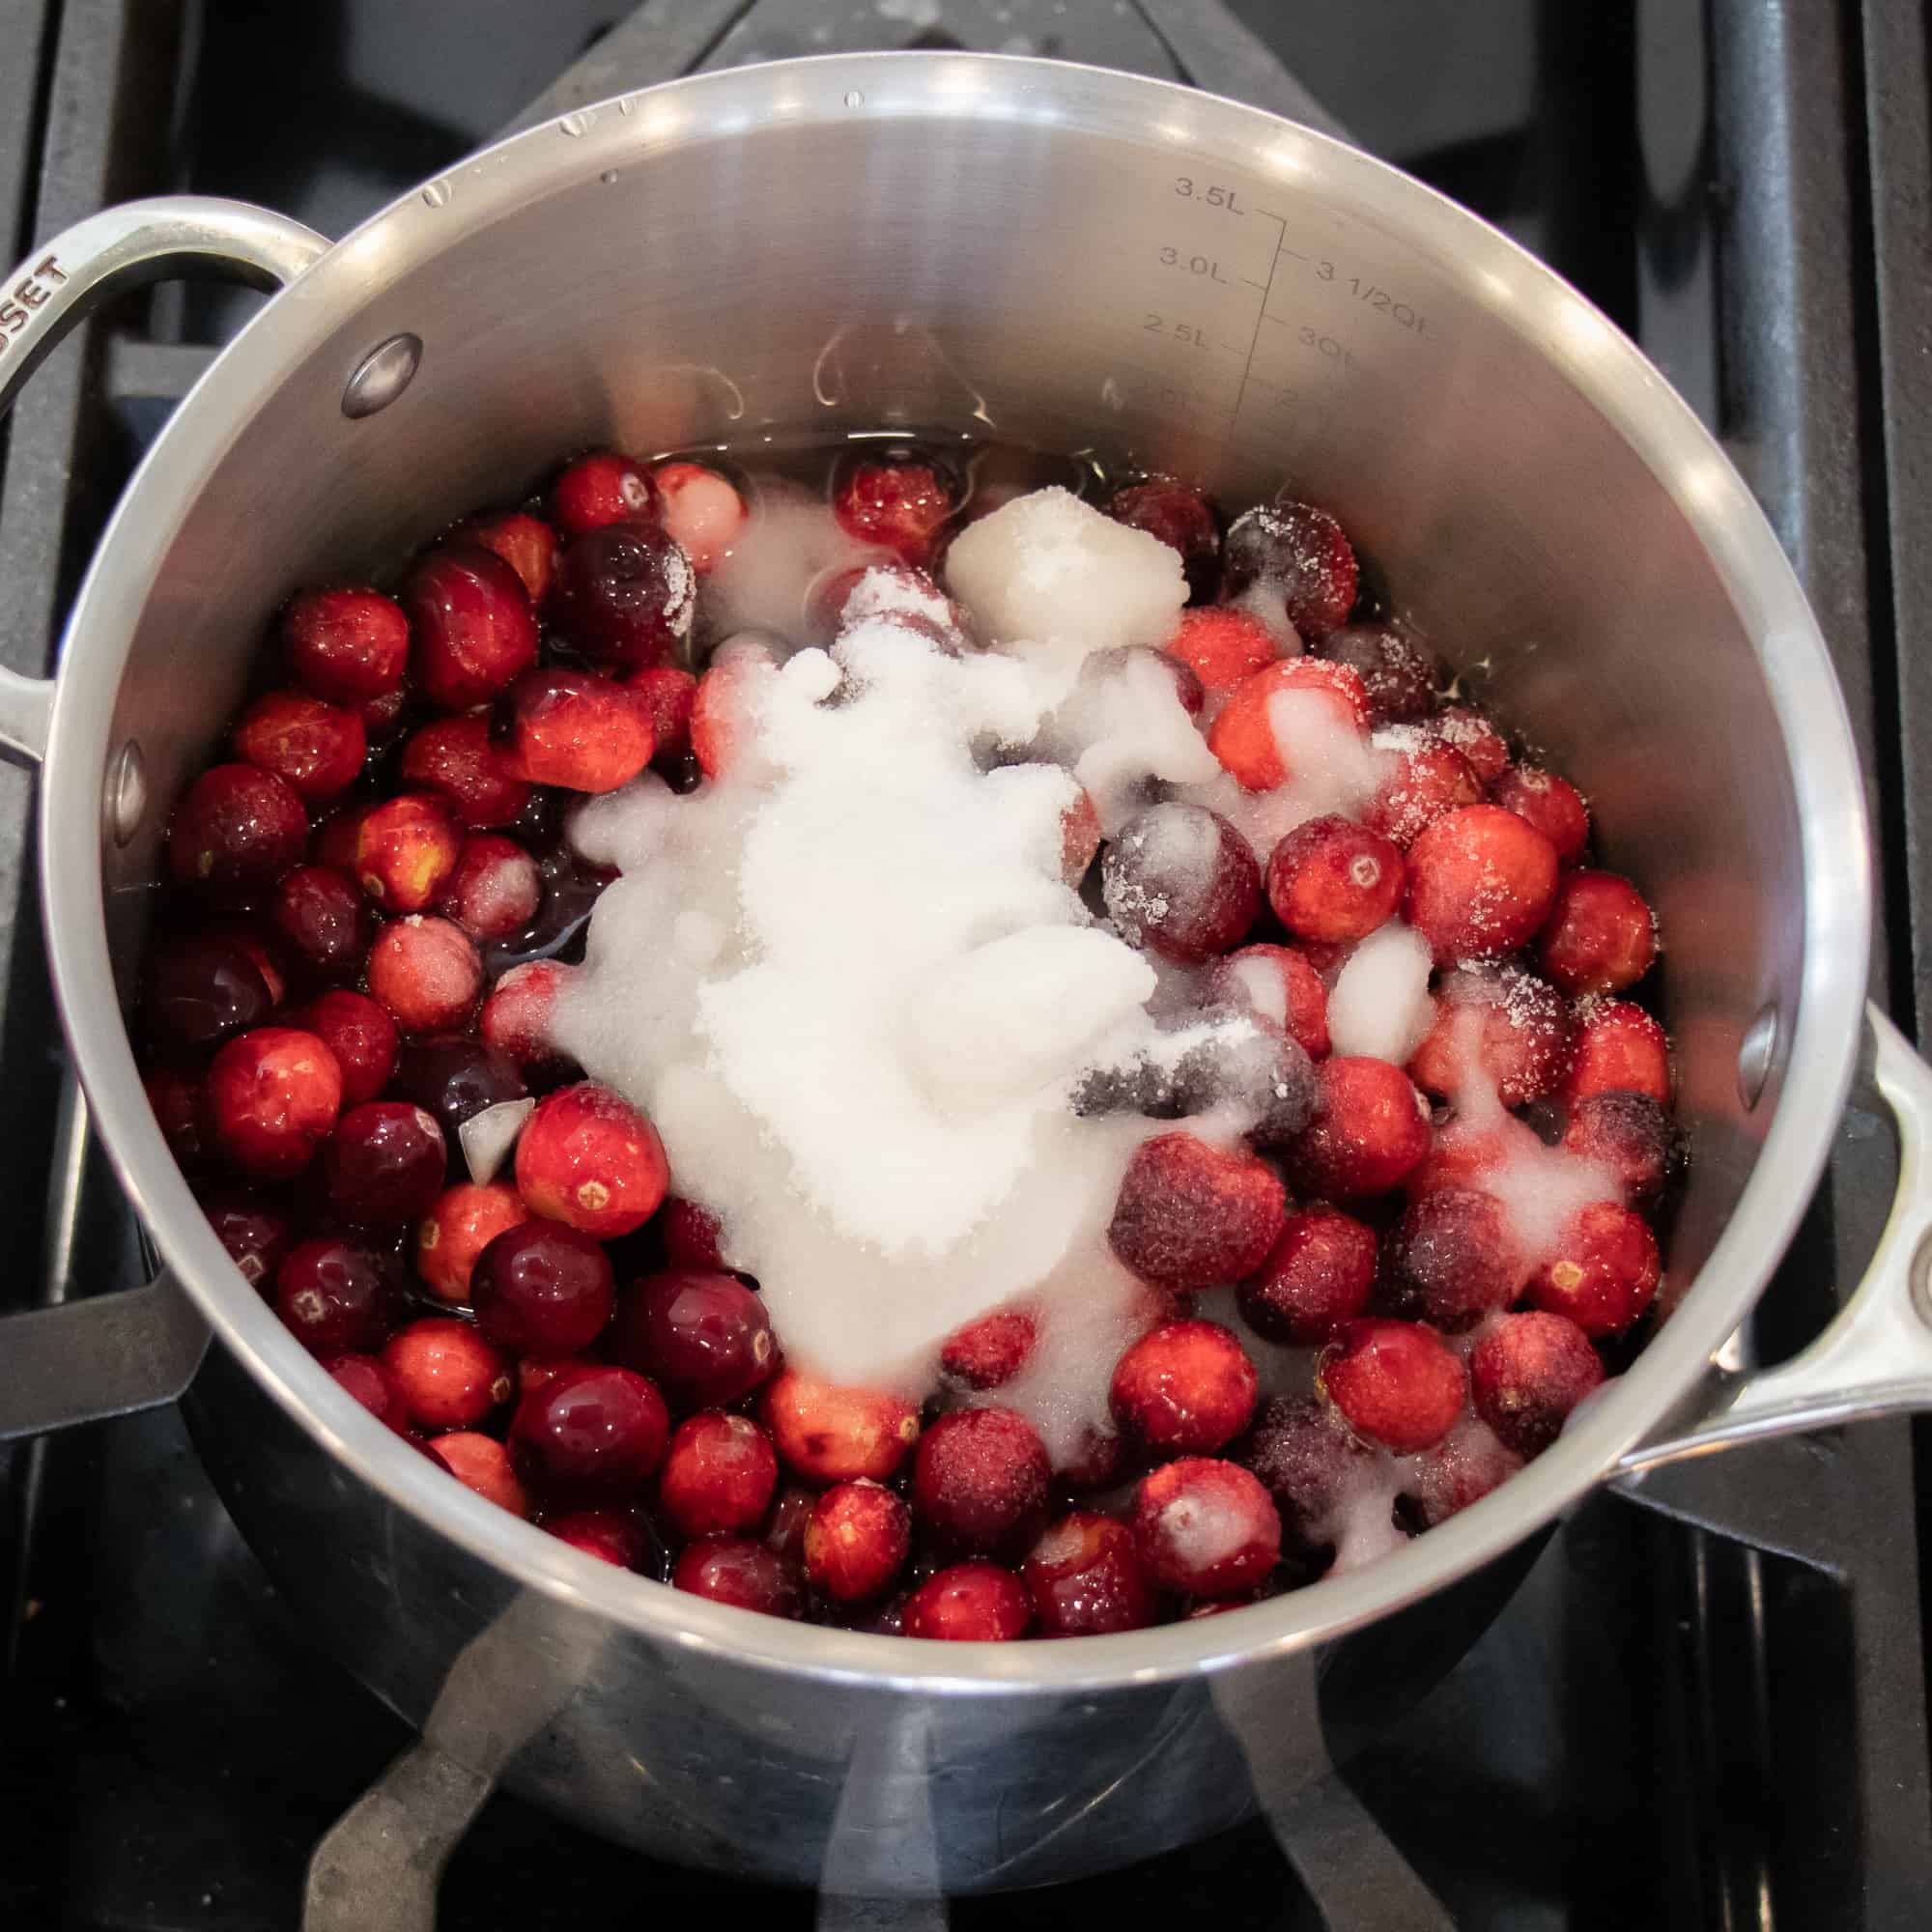 Place the cranberries, sugar, water and spices to a saucepan.